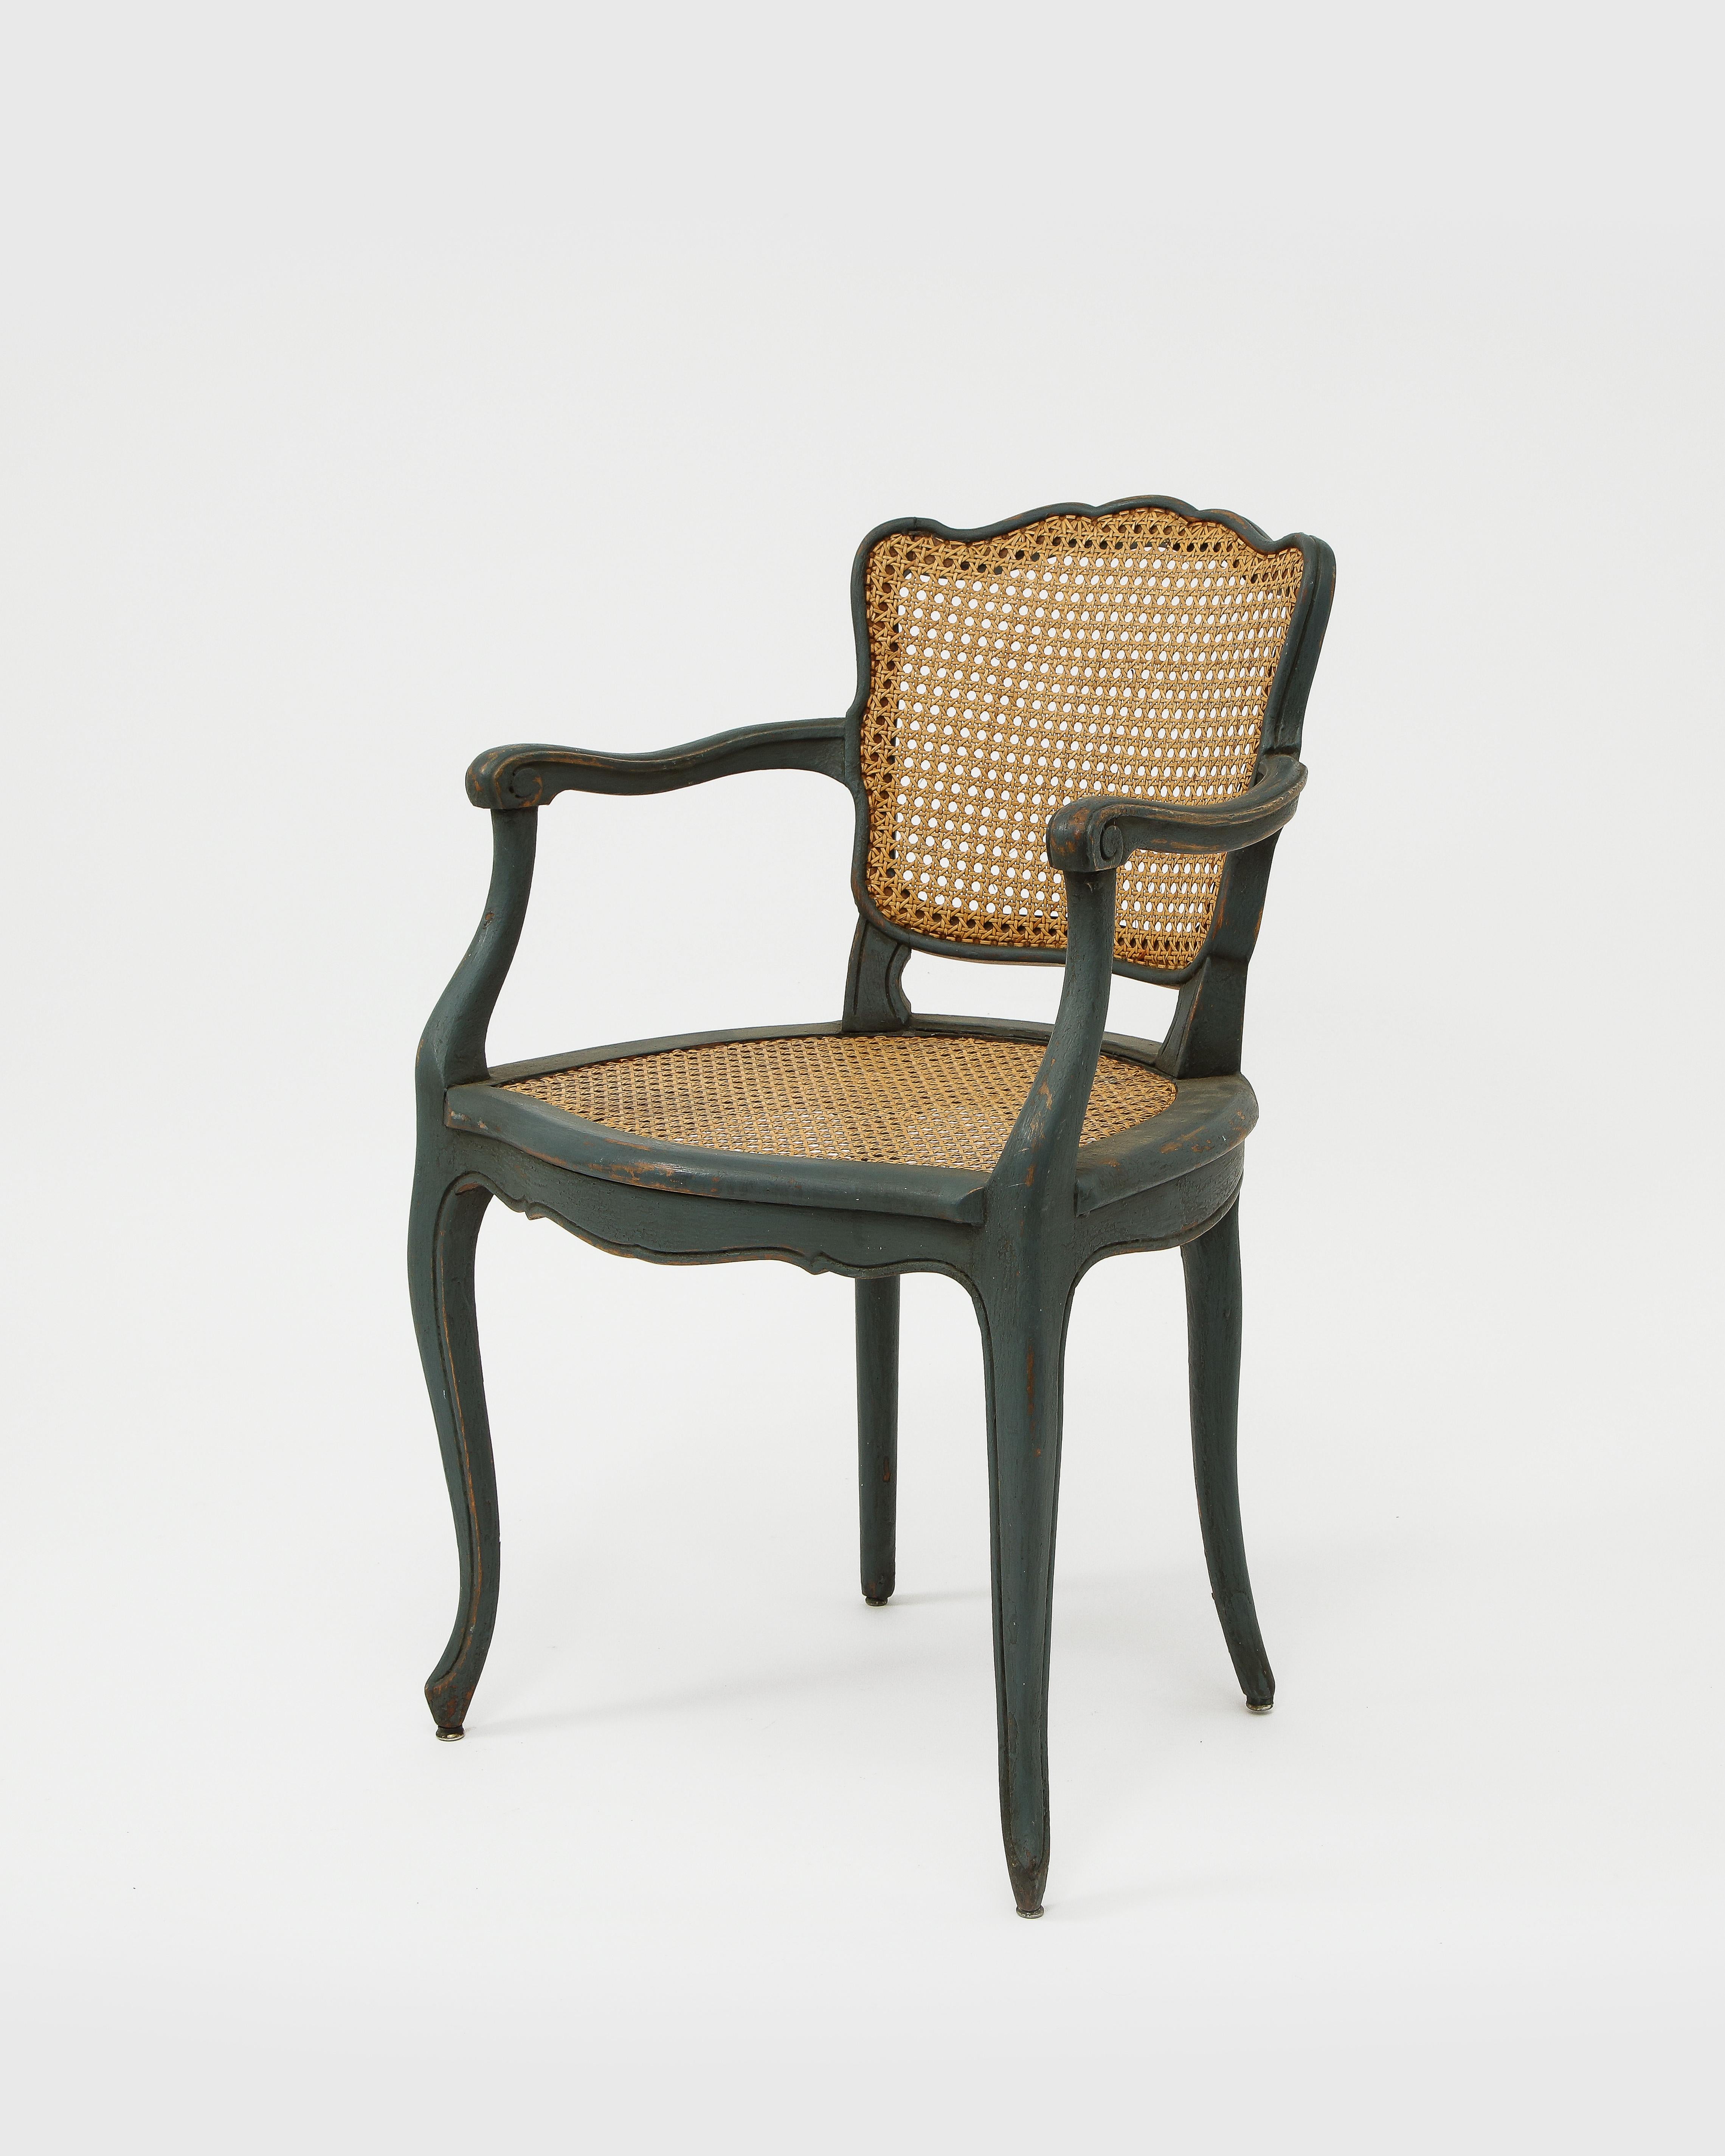 Sinuous lines in the French Provincial tradition. Matte hand painted finish in an extraordinary grey green paint. Custom cushions can be made to fit these chairs.

Several of the caned panels require restoration. Some joints may require